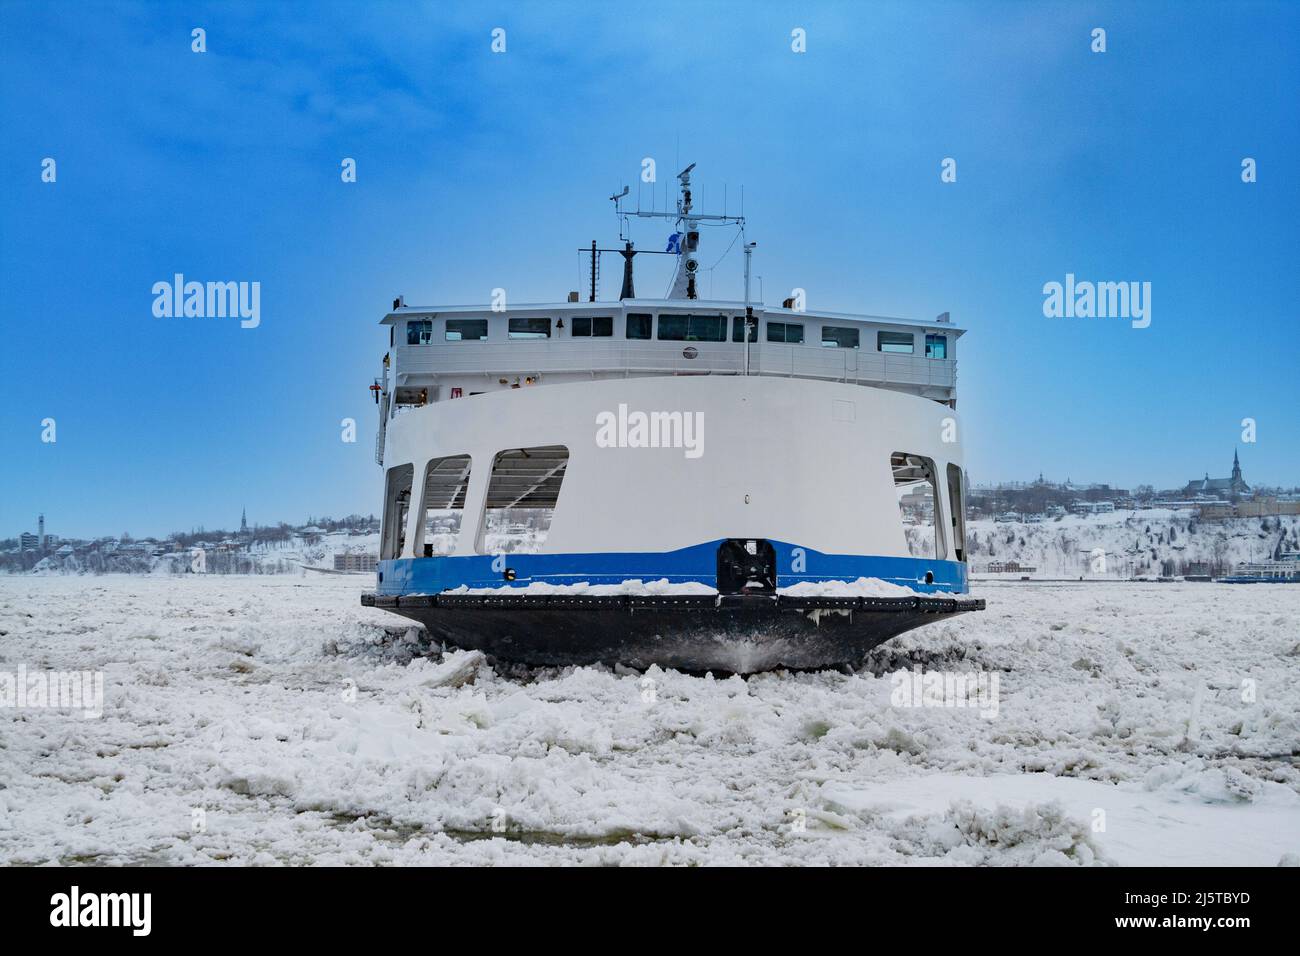 Ship ferry going through ice and snow in the harbor Stock Photo